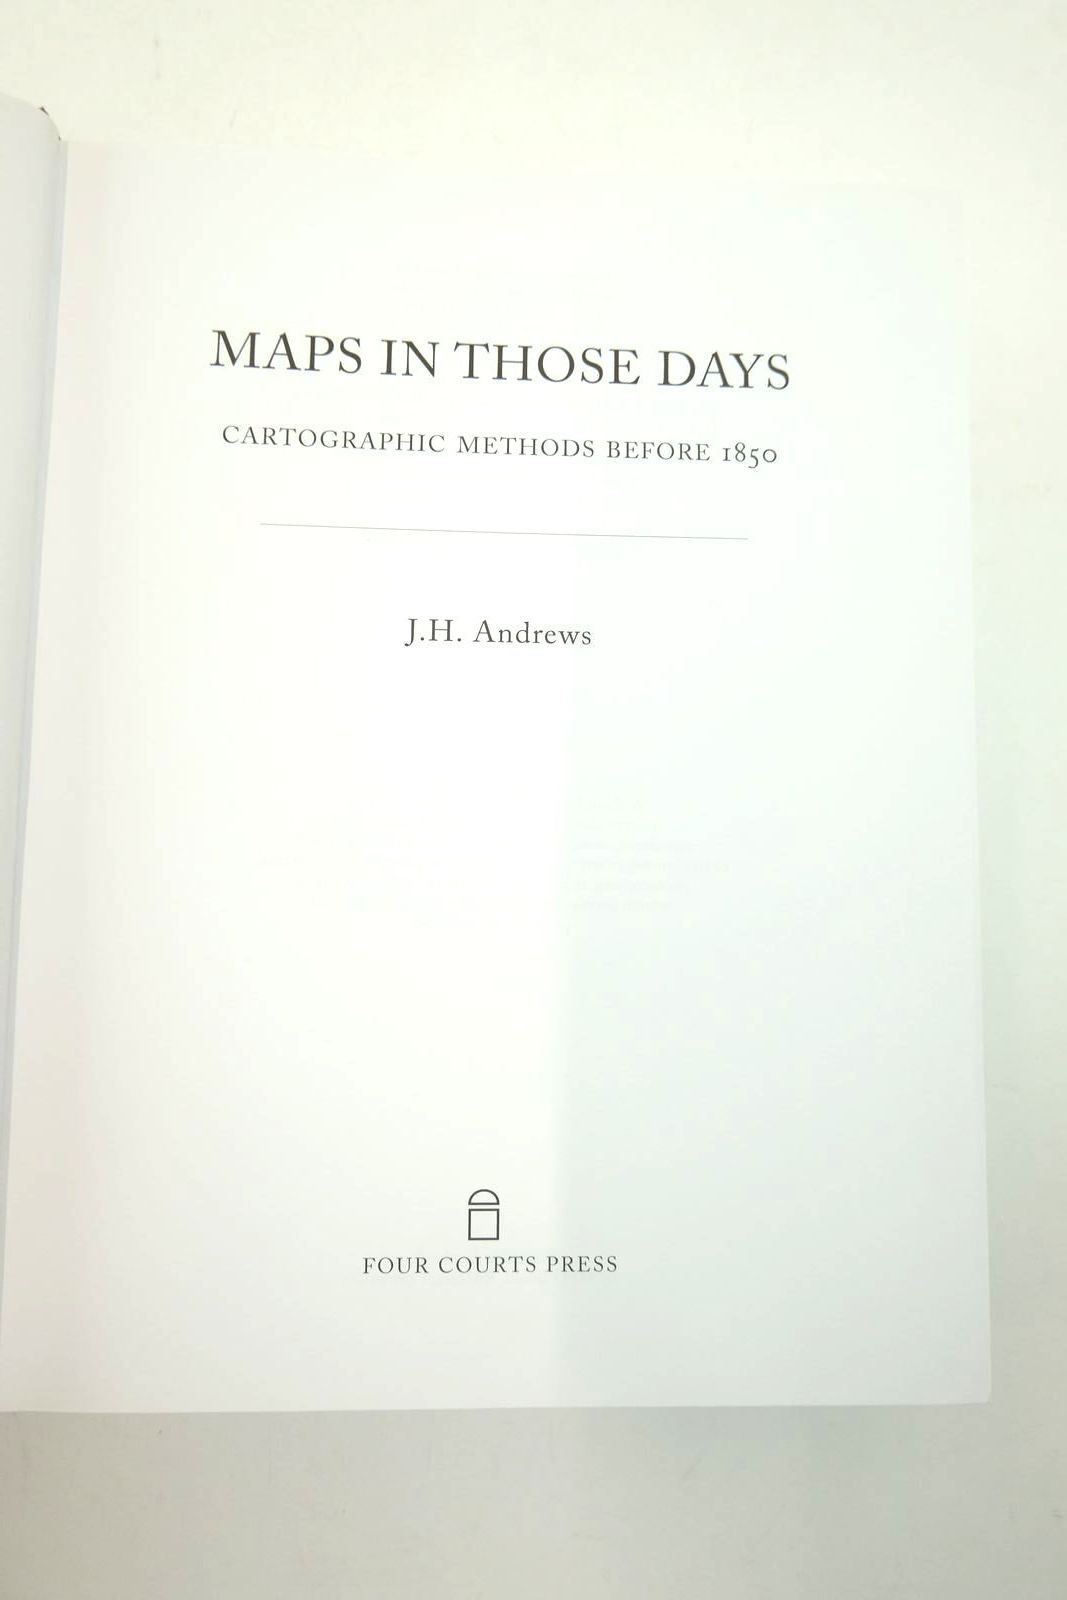 Photo of MAPS IN THOSE DAYS: CARTOGRAPHIC METHODS BEFORE 1850 written by Andrews, J.H. published by Four Courts Press (STOCK CODE: 2140532)  for sale by Stella & Rose's Books